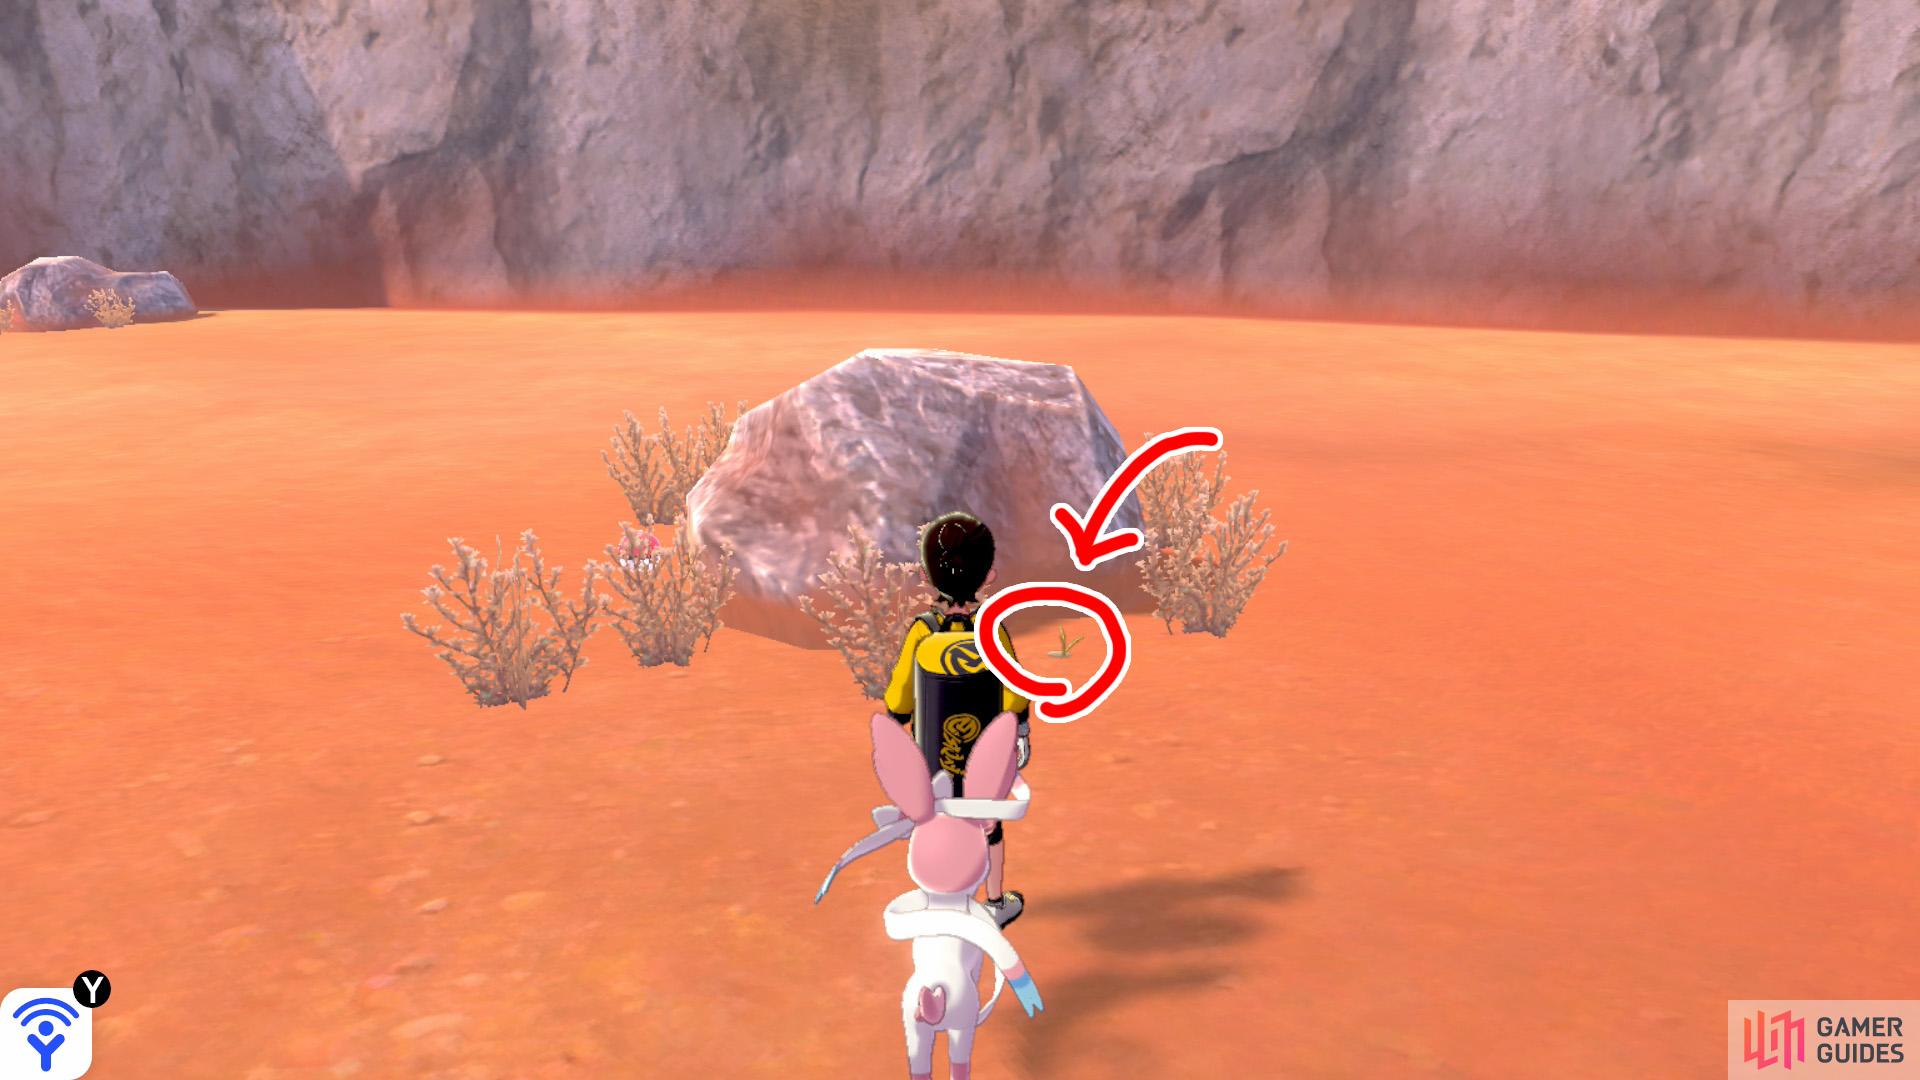 10/10: From Diglett 9, if Warm-Up Tunnel is still on your left, there should be a boulder and vegetation directly ahead, away from the cliff wall. Go over there and check around the right for the final cause of migraine.